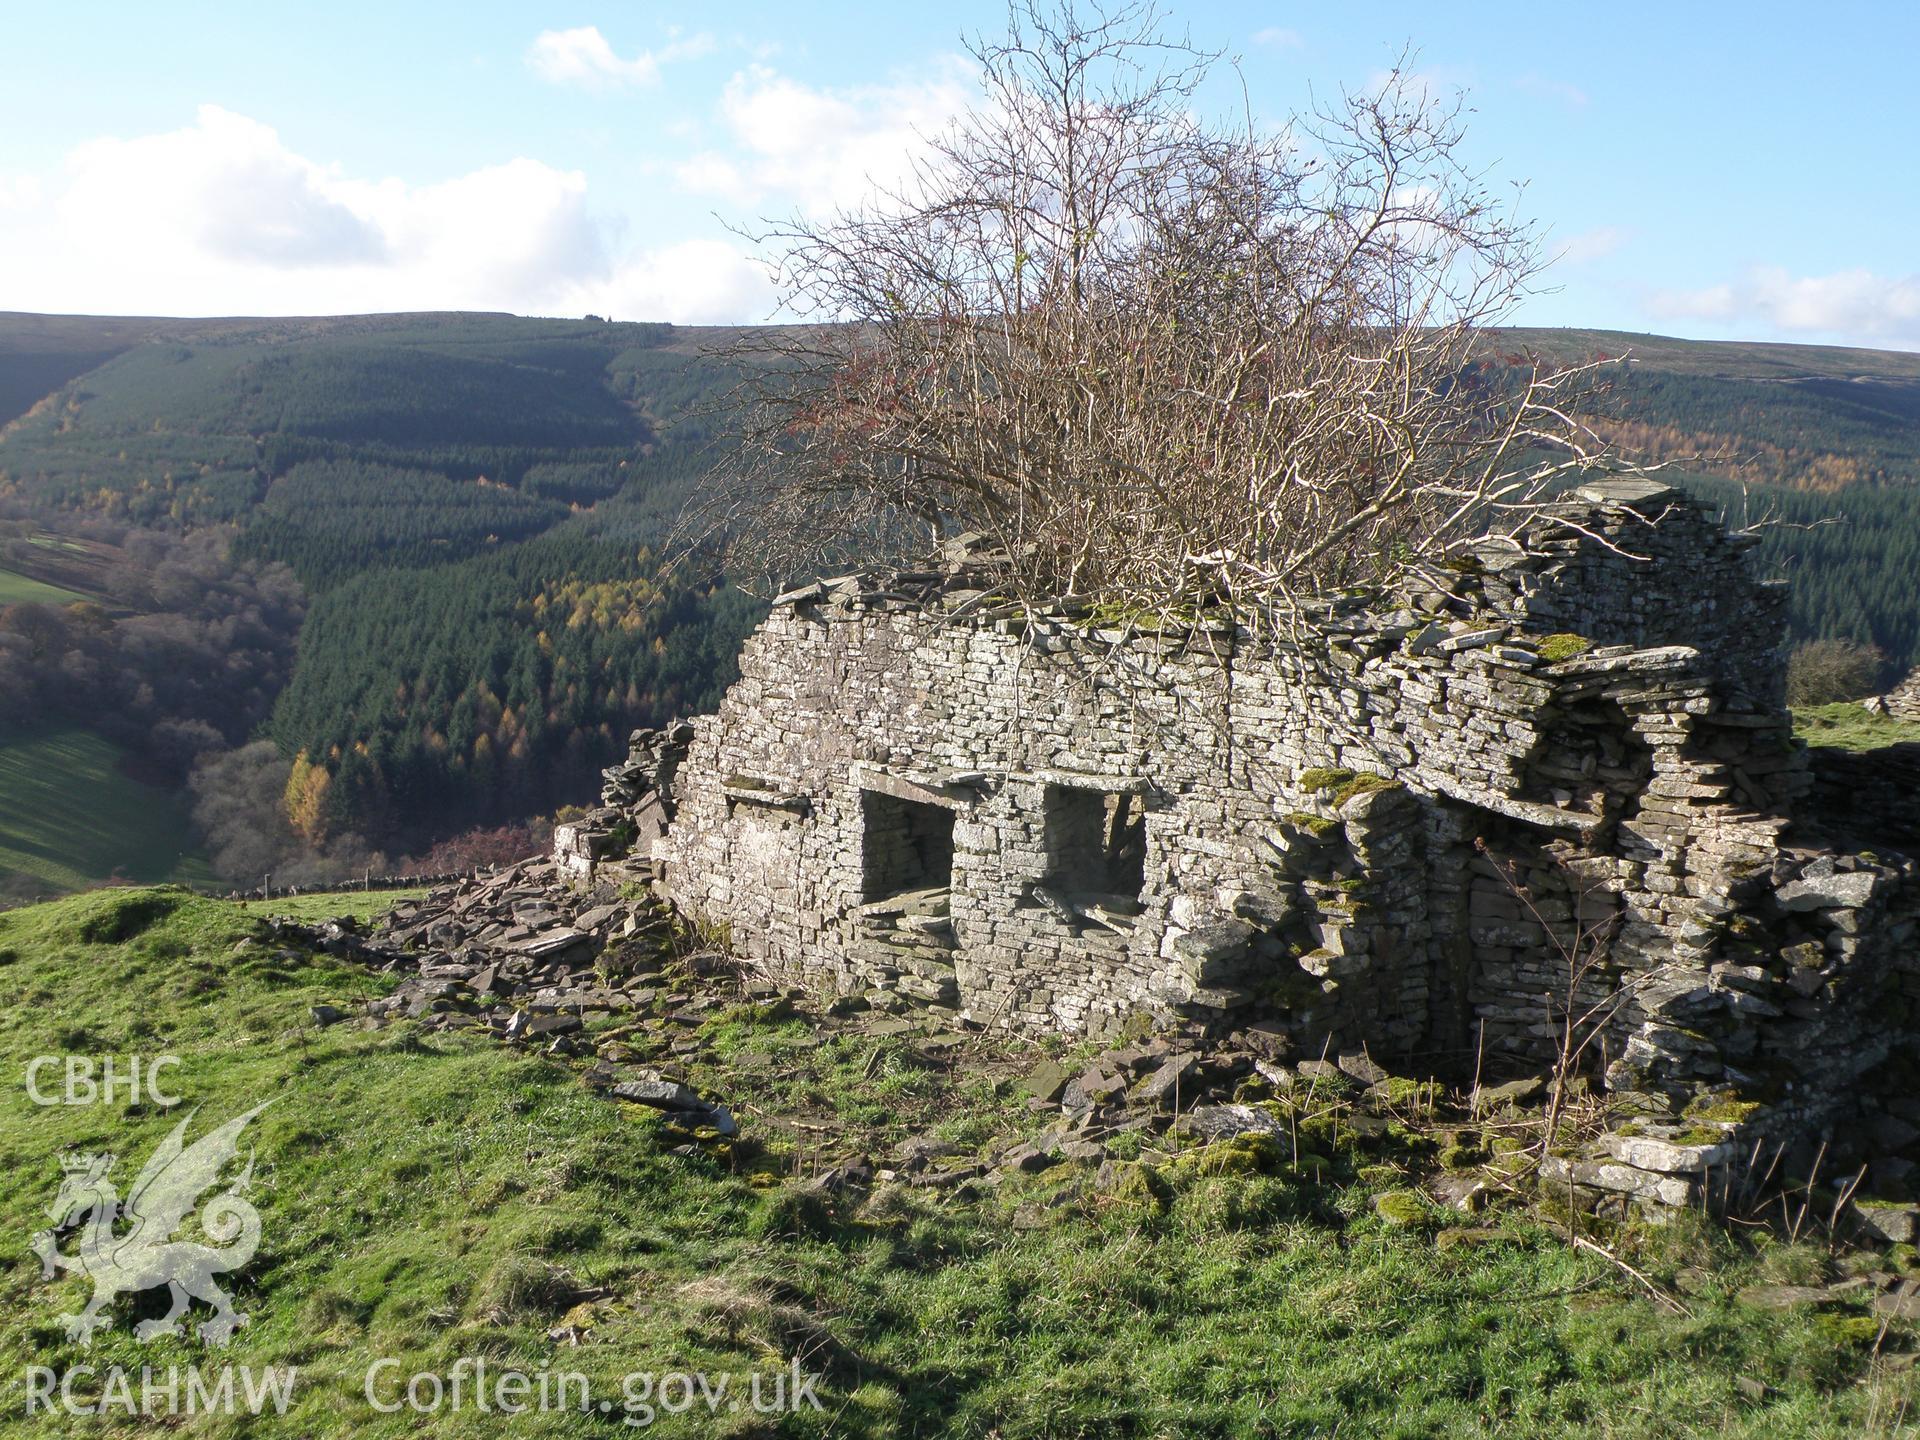 Colour photo of ruins at Dial Gareg, taken by Paul R. Davis and dated 13th November 2010.